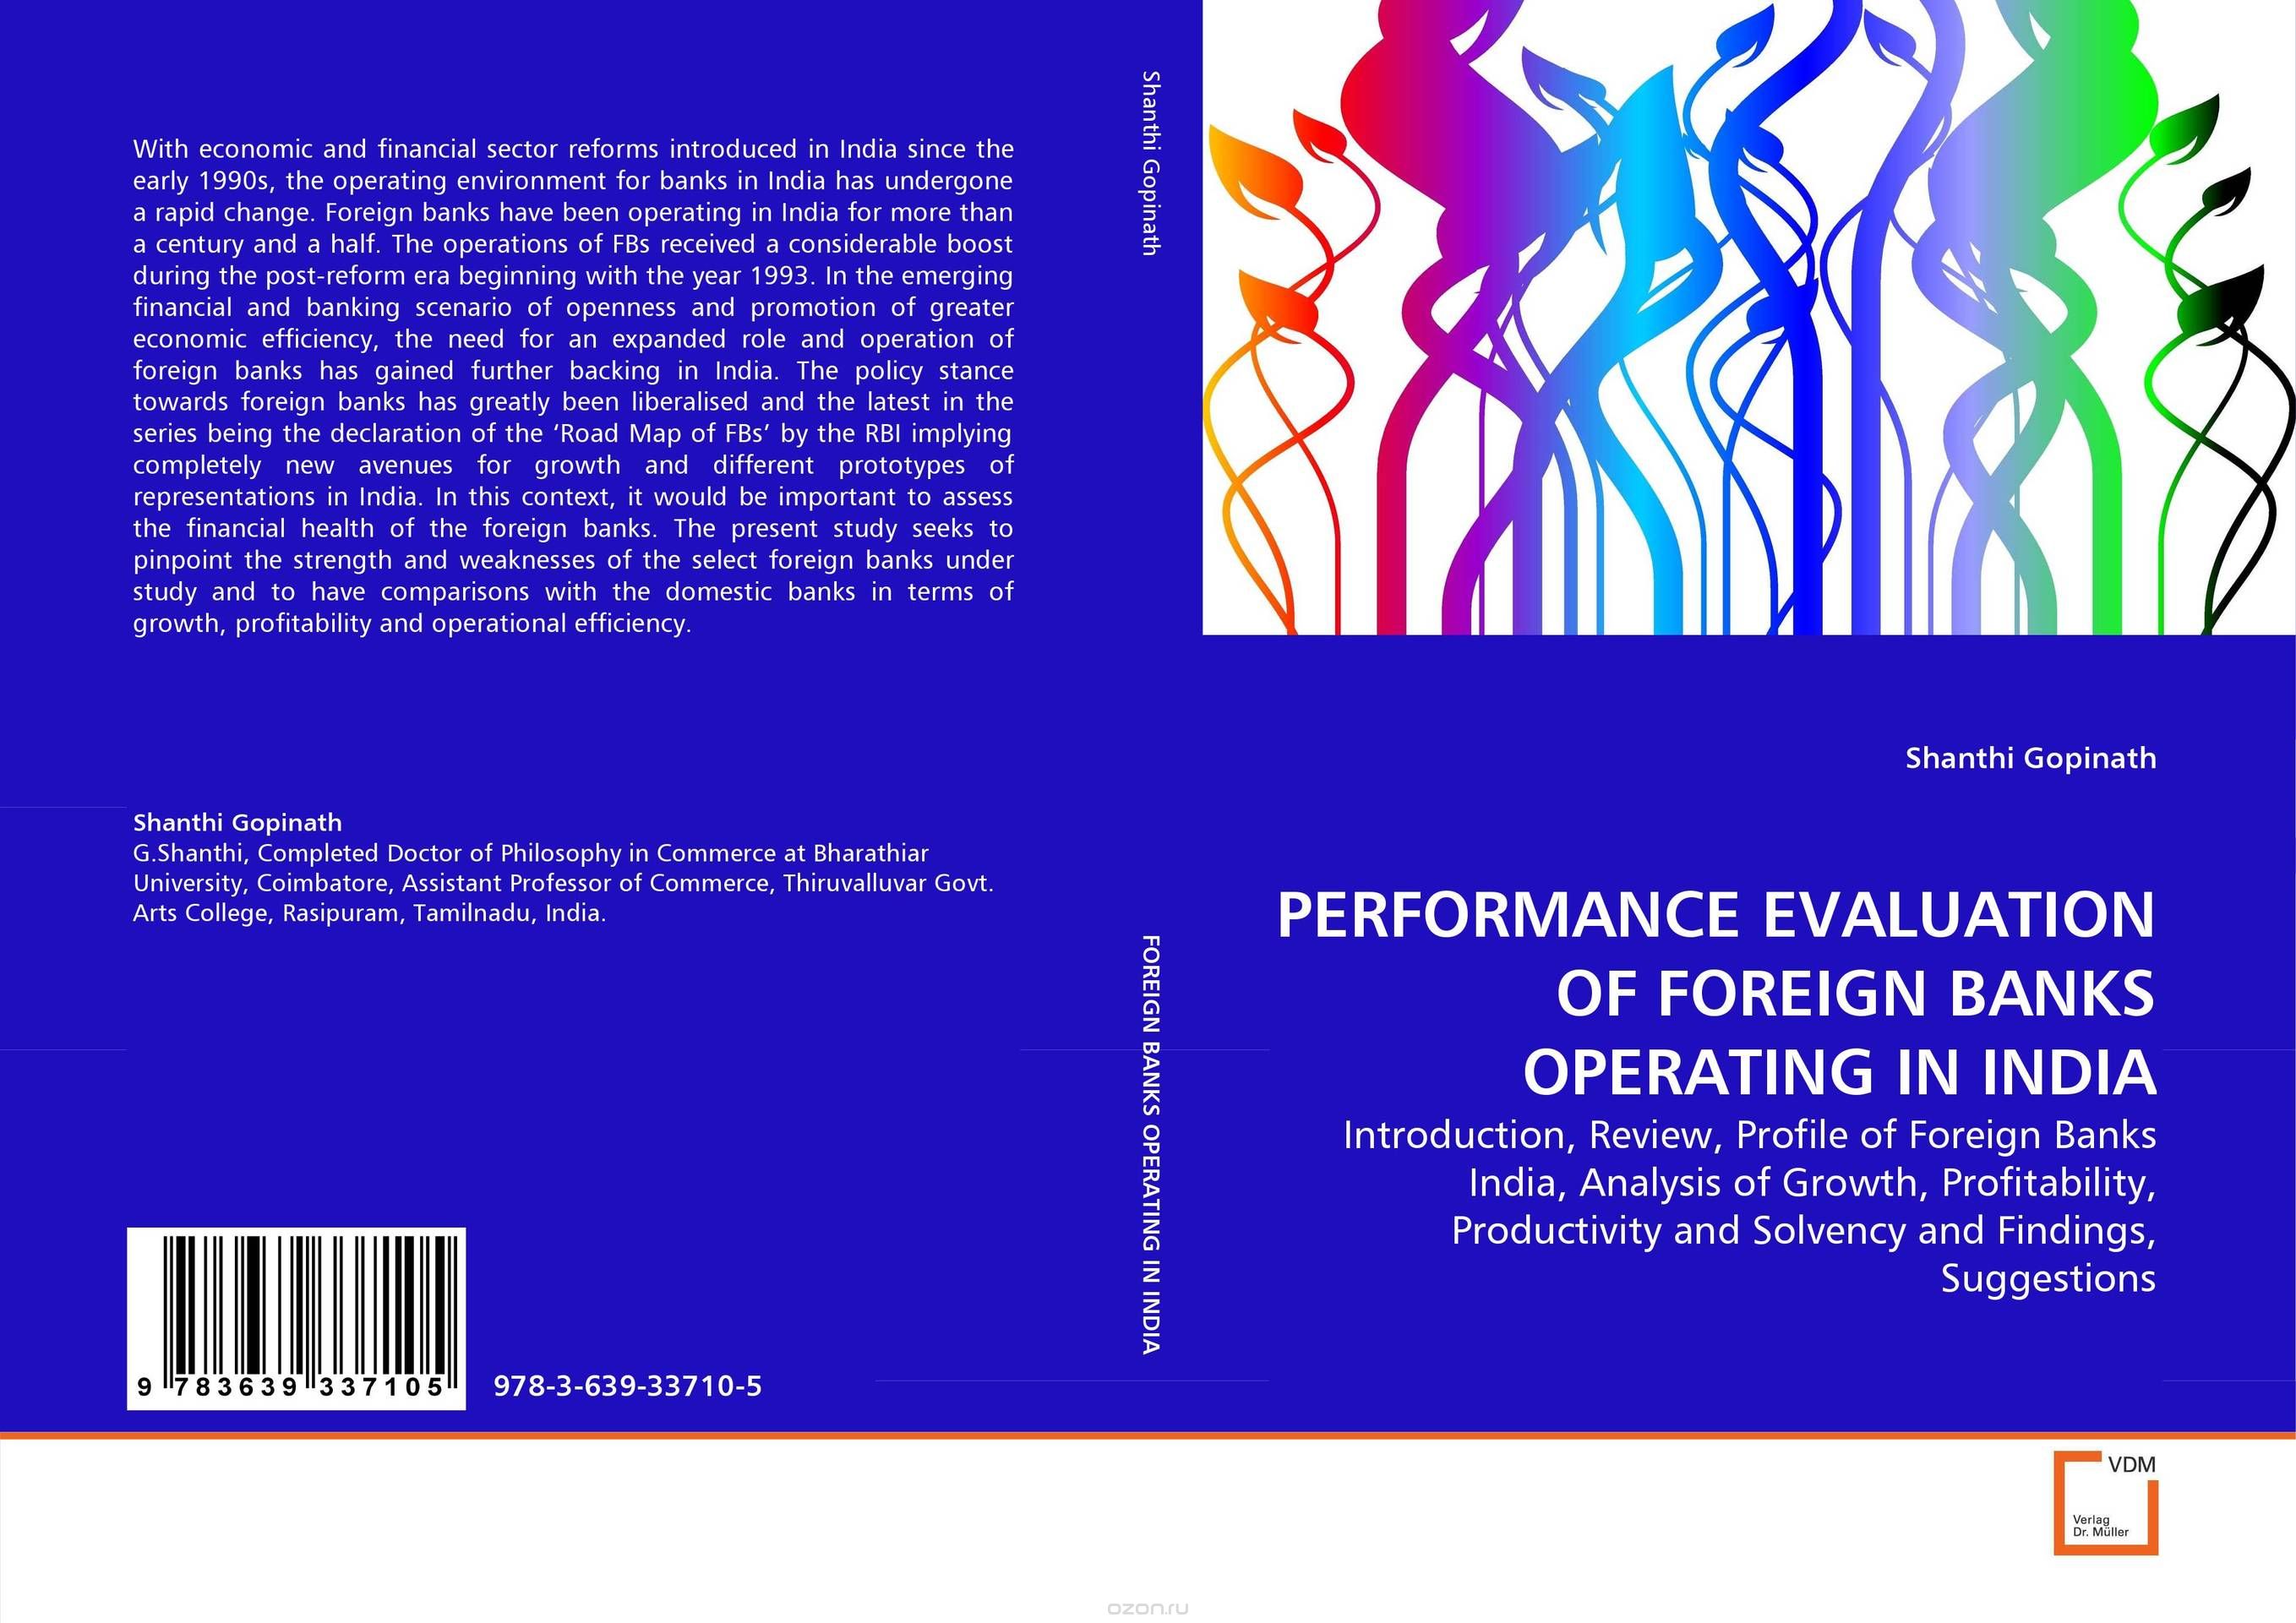 PERFORMANCE EVALUATION OF FOREIGN BANKS OPERATING IN INDIA